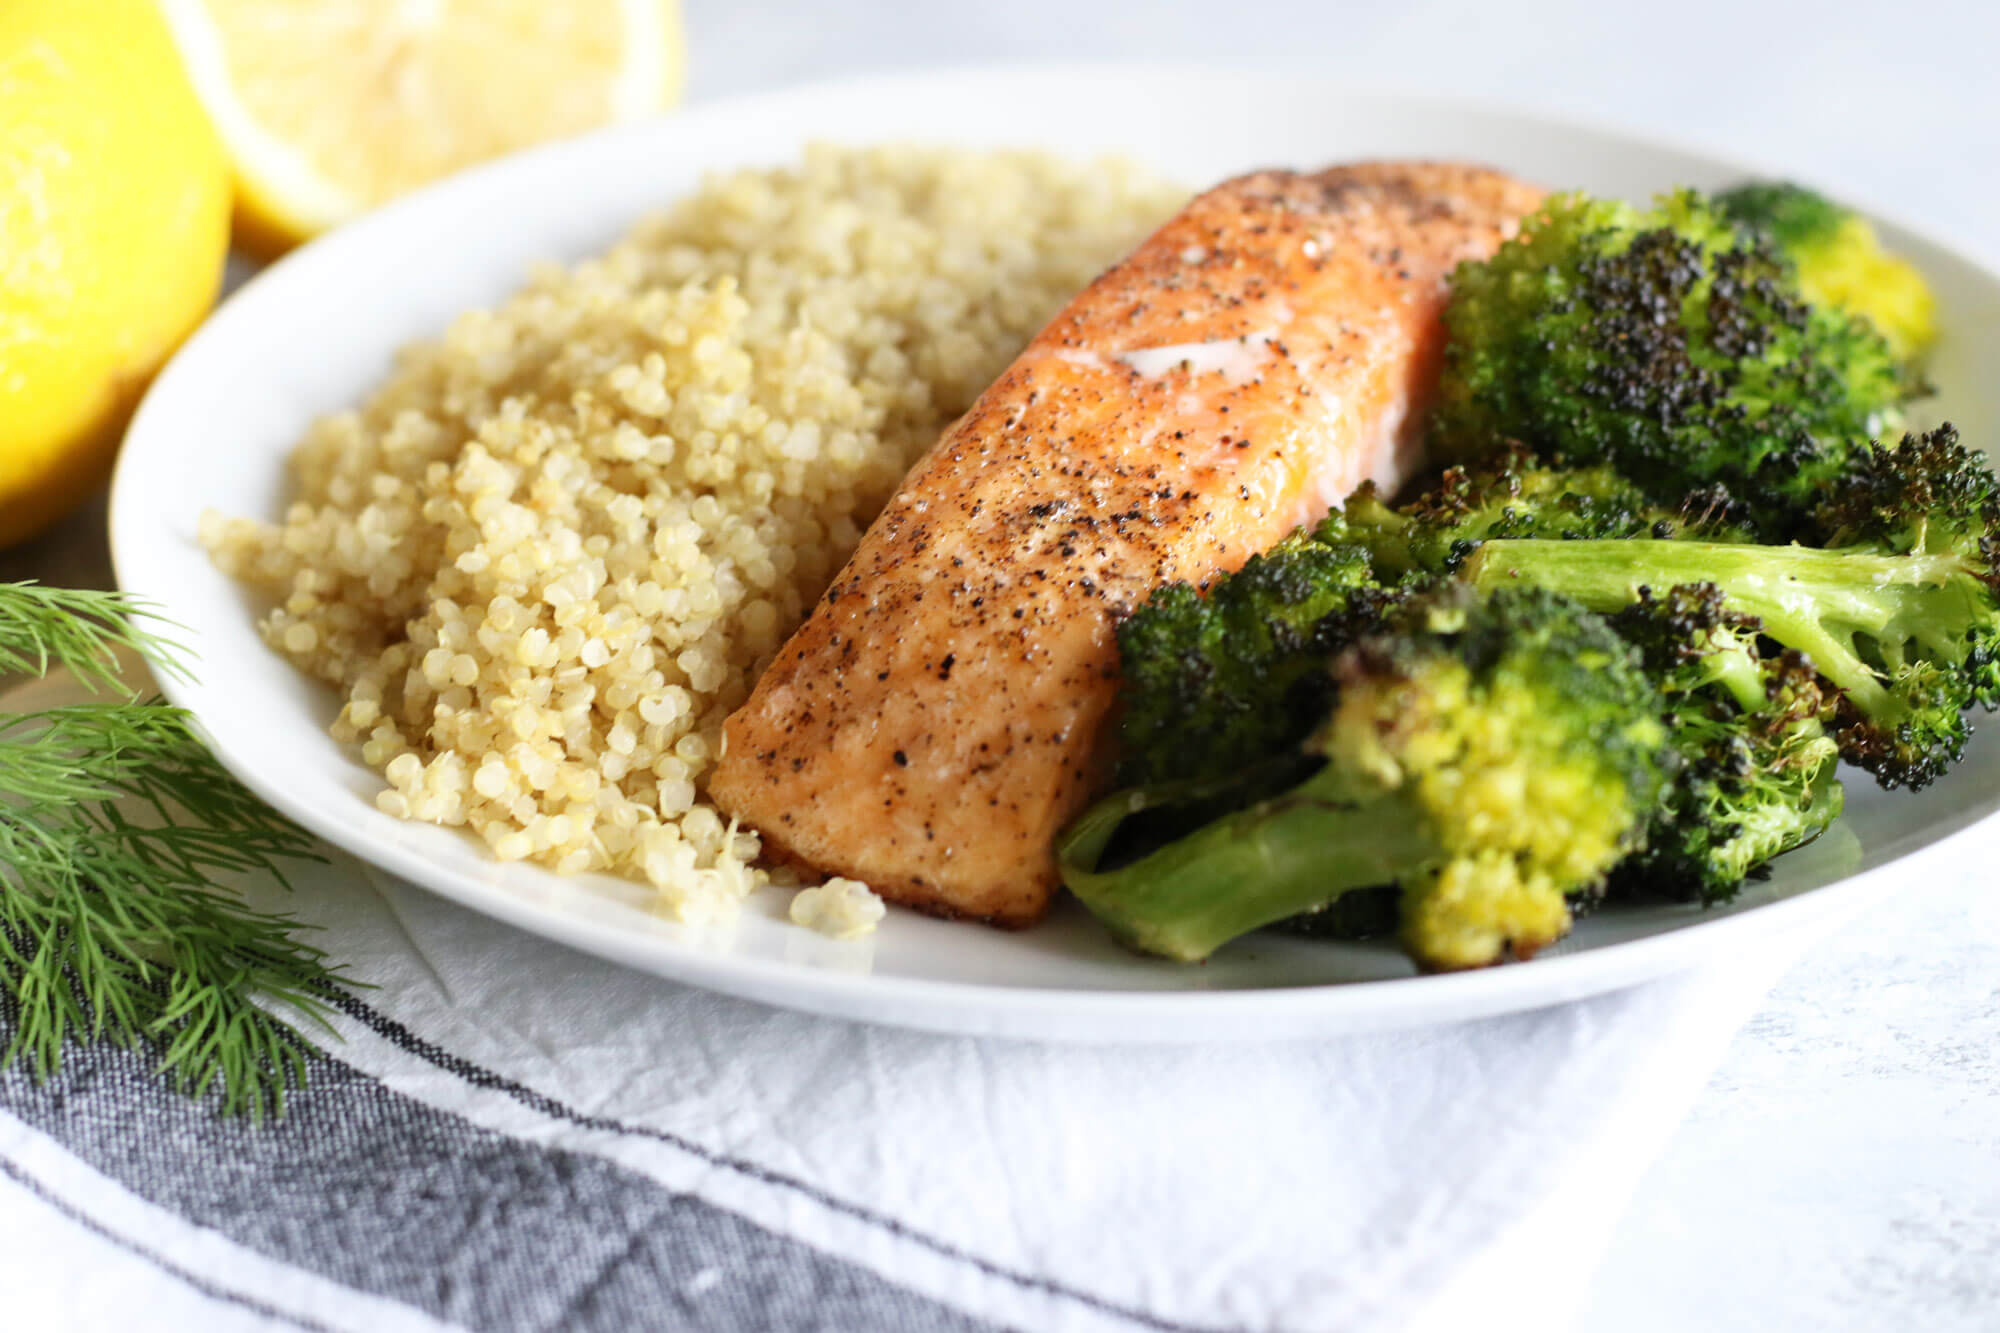 20 Meal Ideas to Help Clients Manage Acne: Baked Salmon with Broccoli & Quinoa